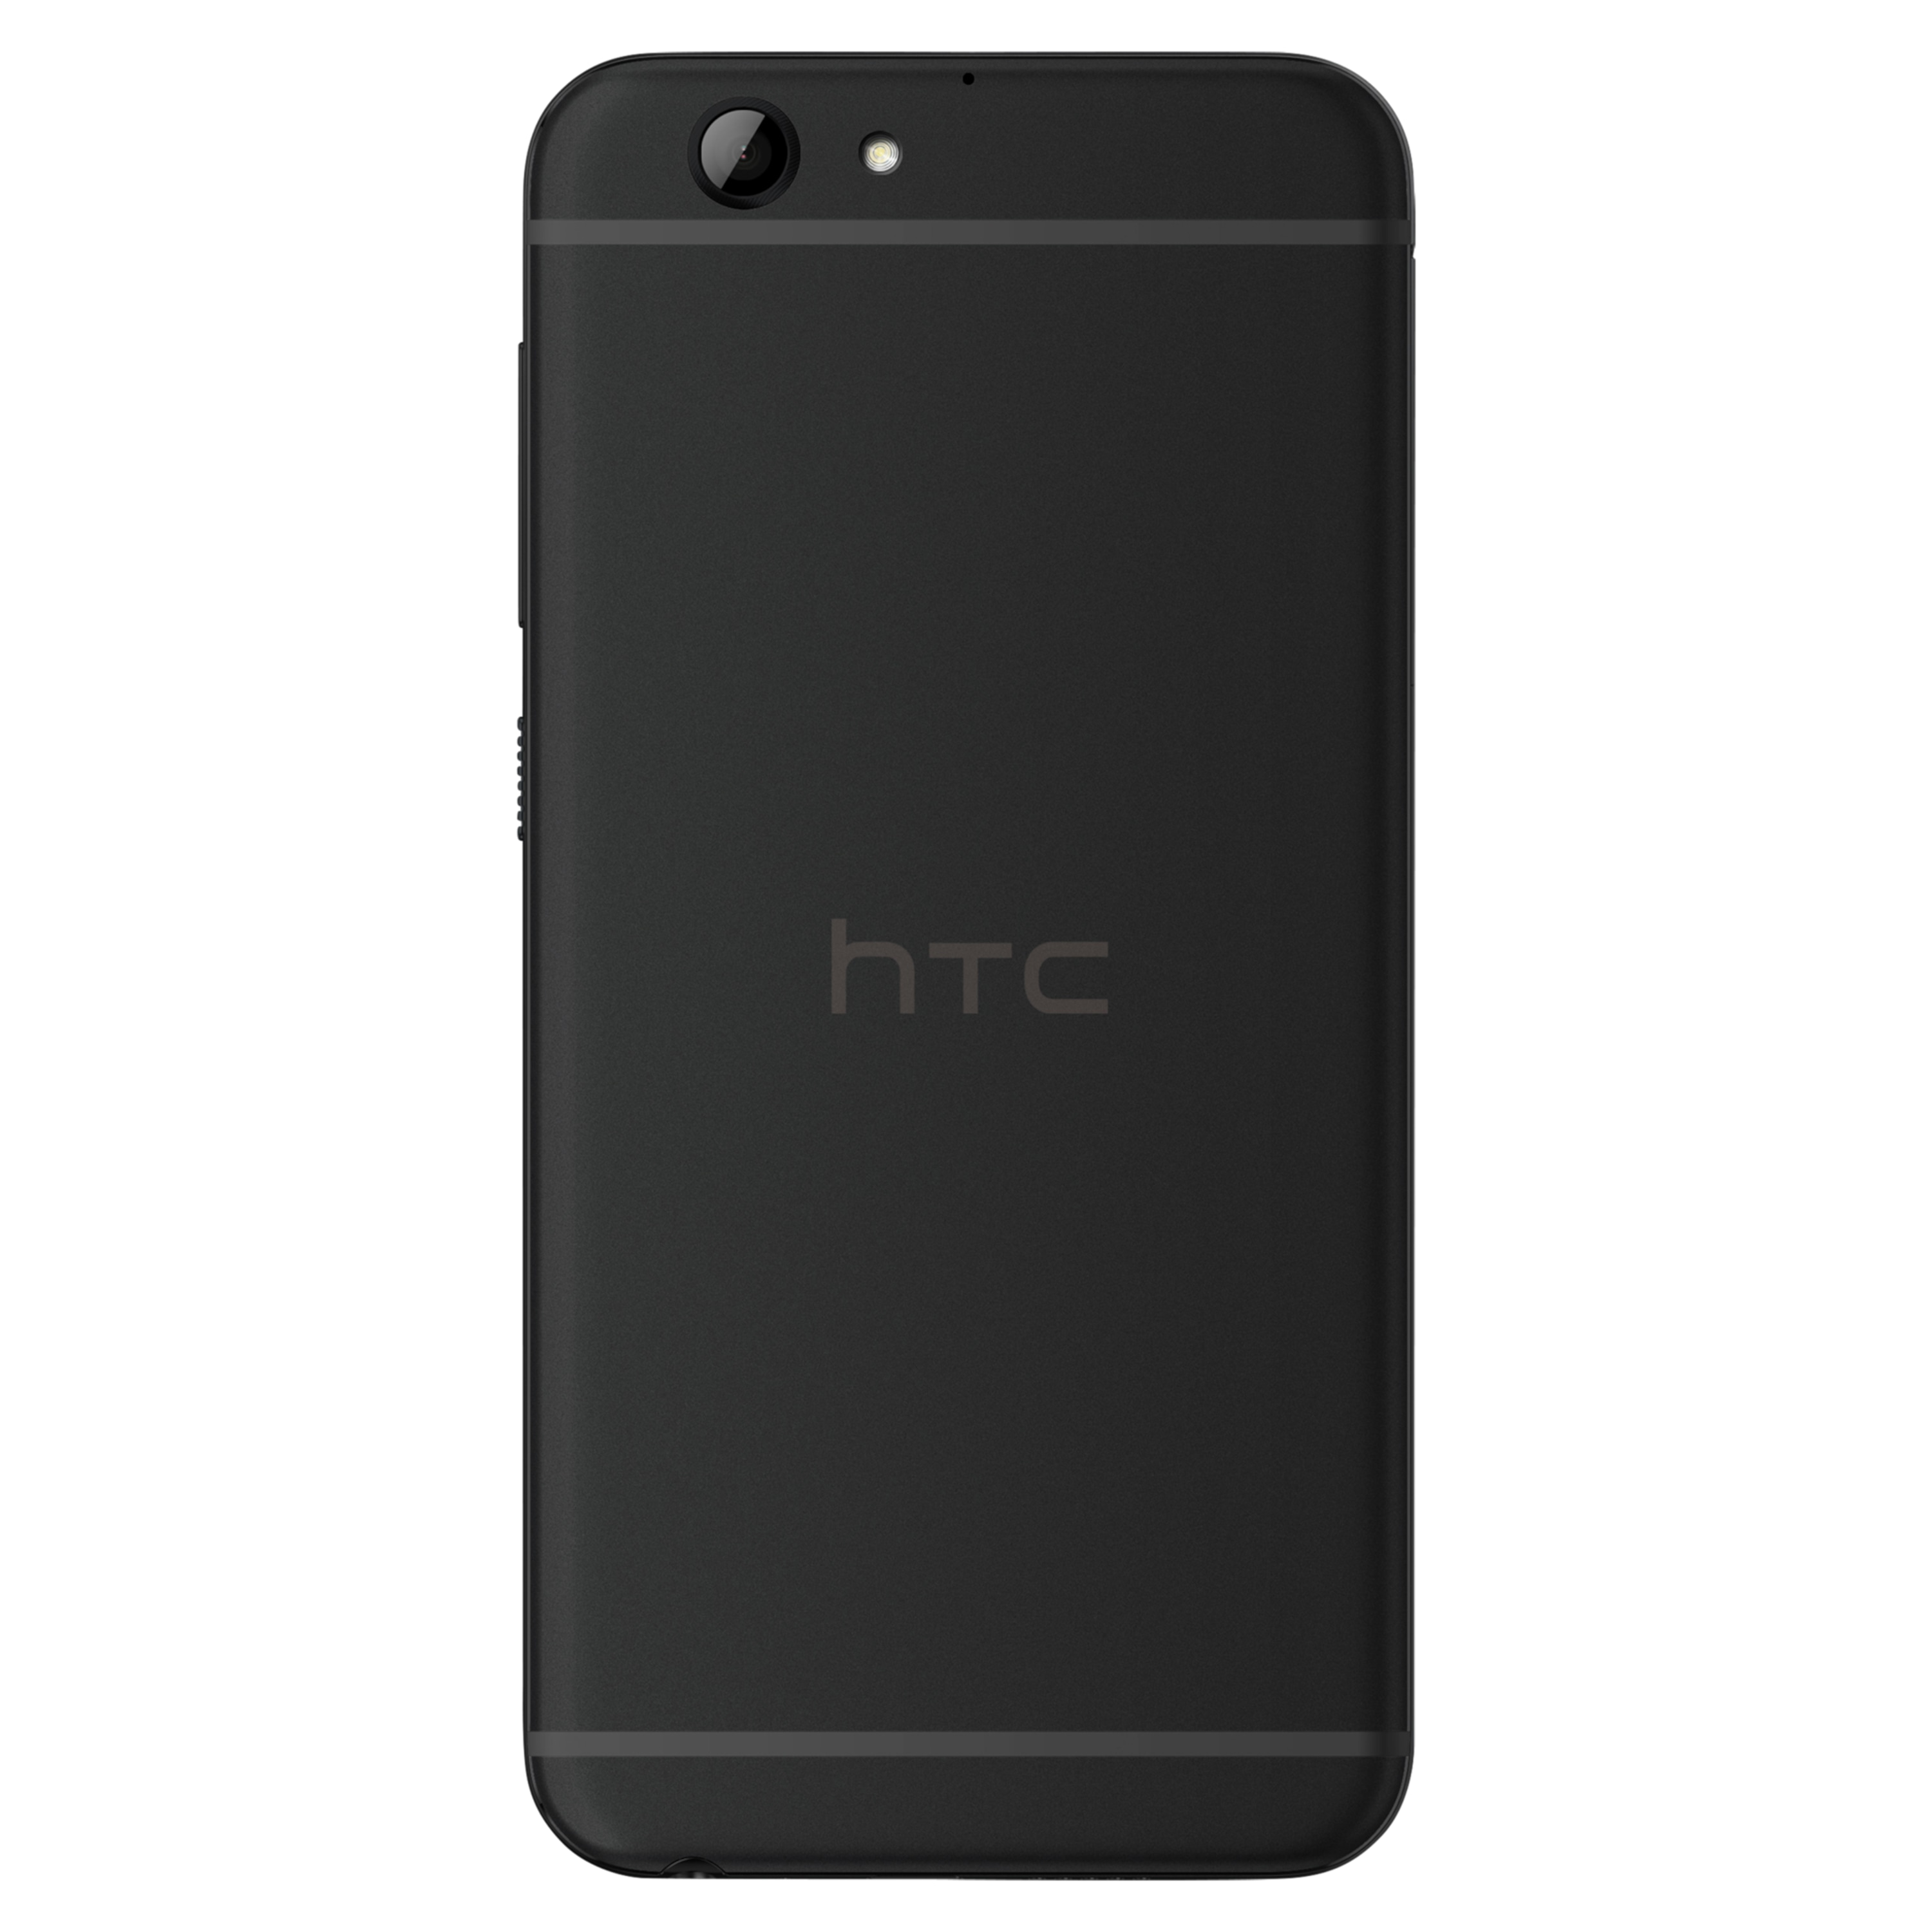 HTC one A9s Smartphone, 12,7 cm (5") HD-Display, Android™ 6.0, 32 GB Speicher, Octa-Core-Prozessor